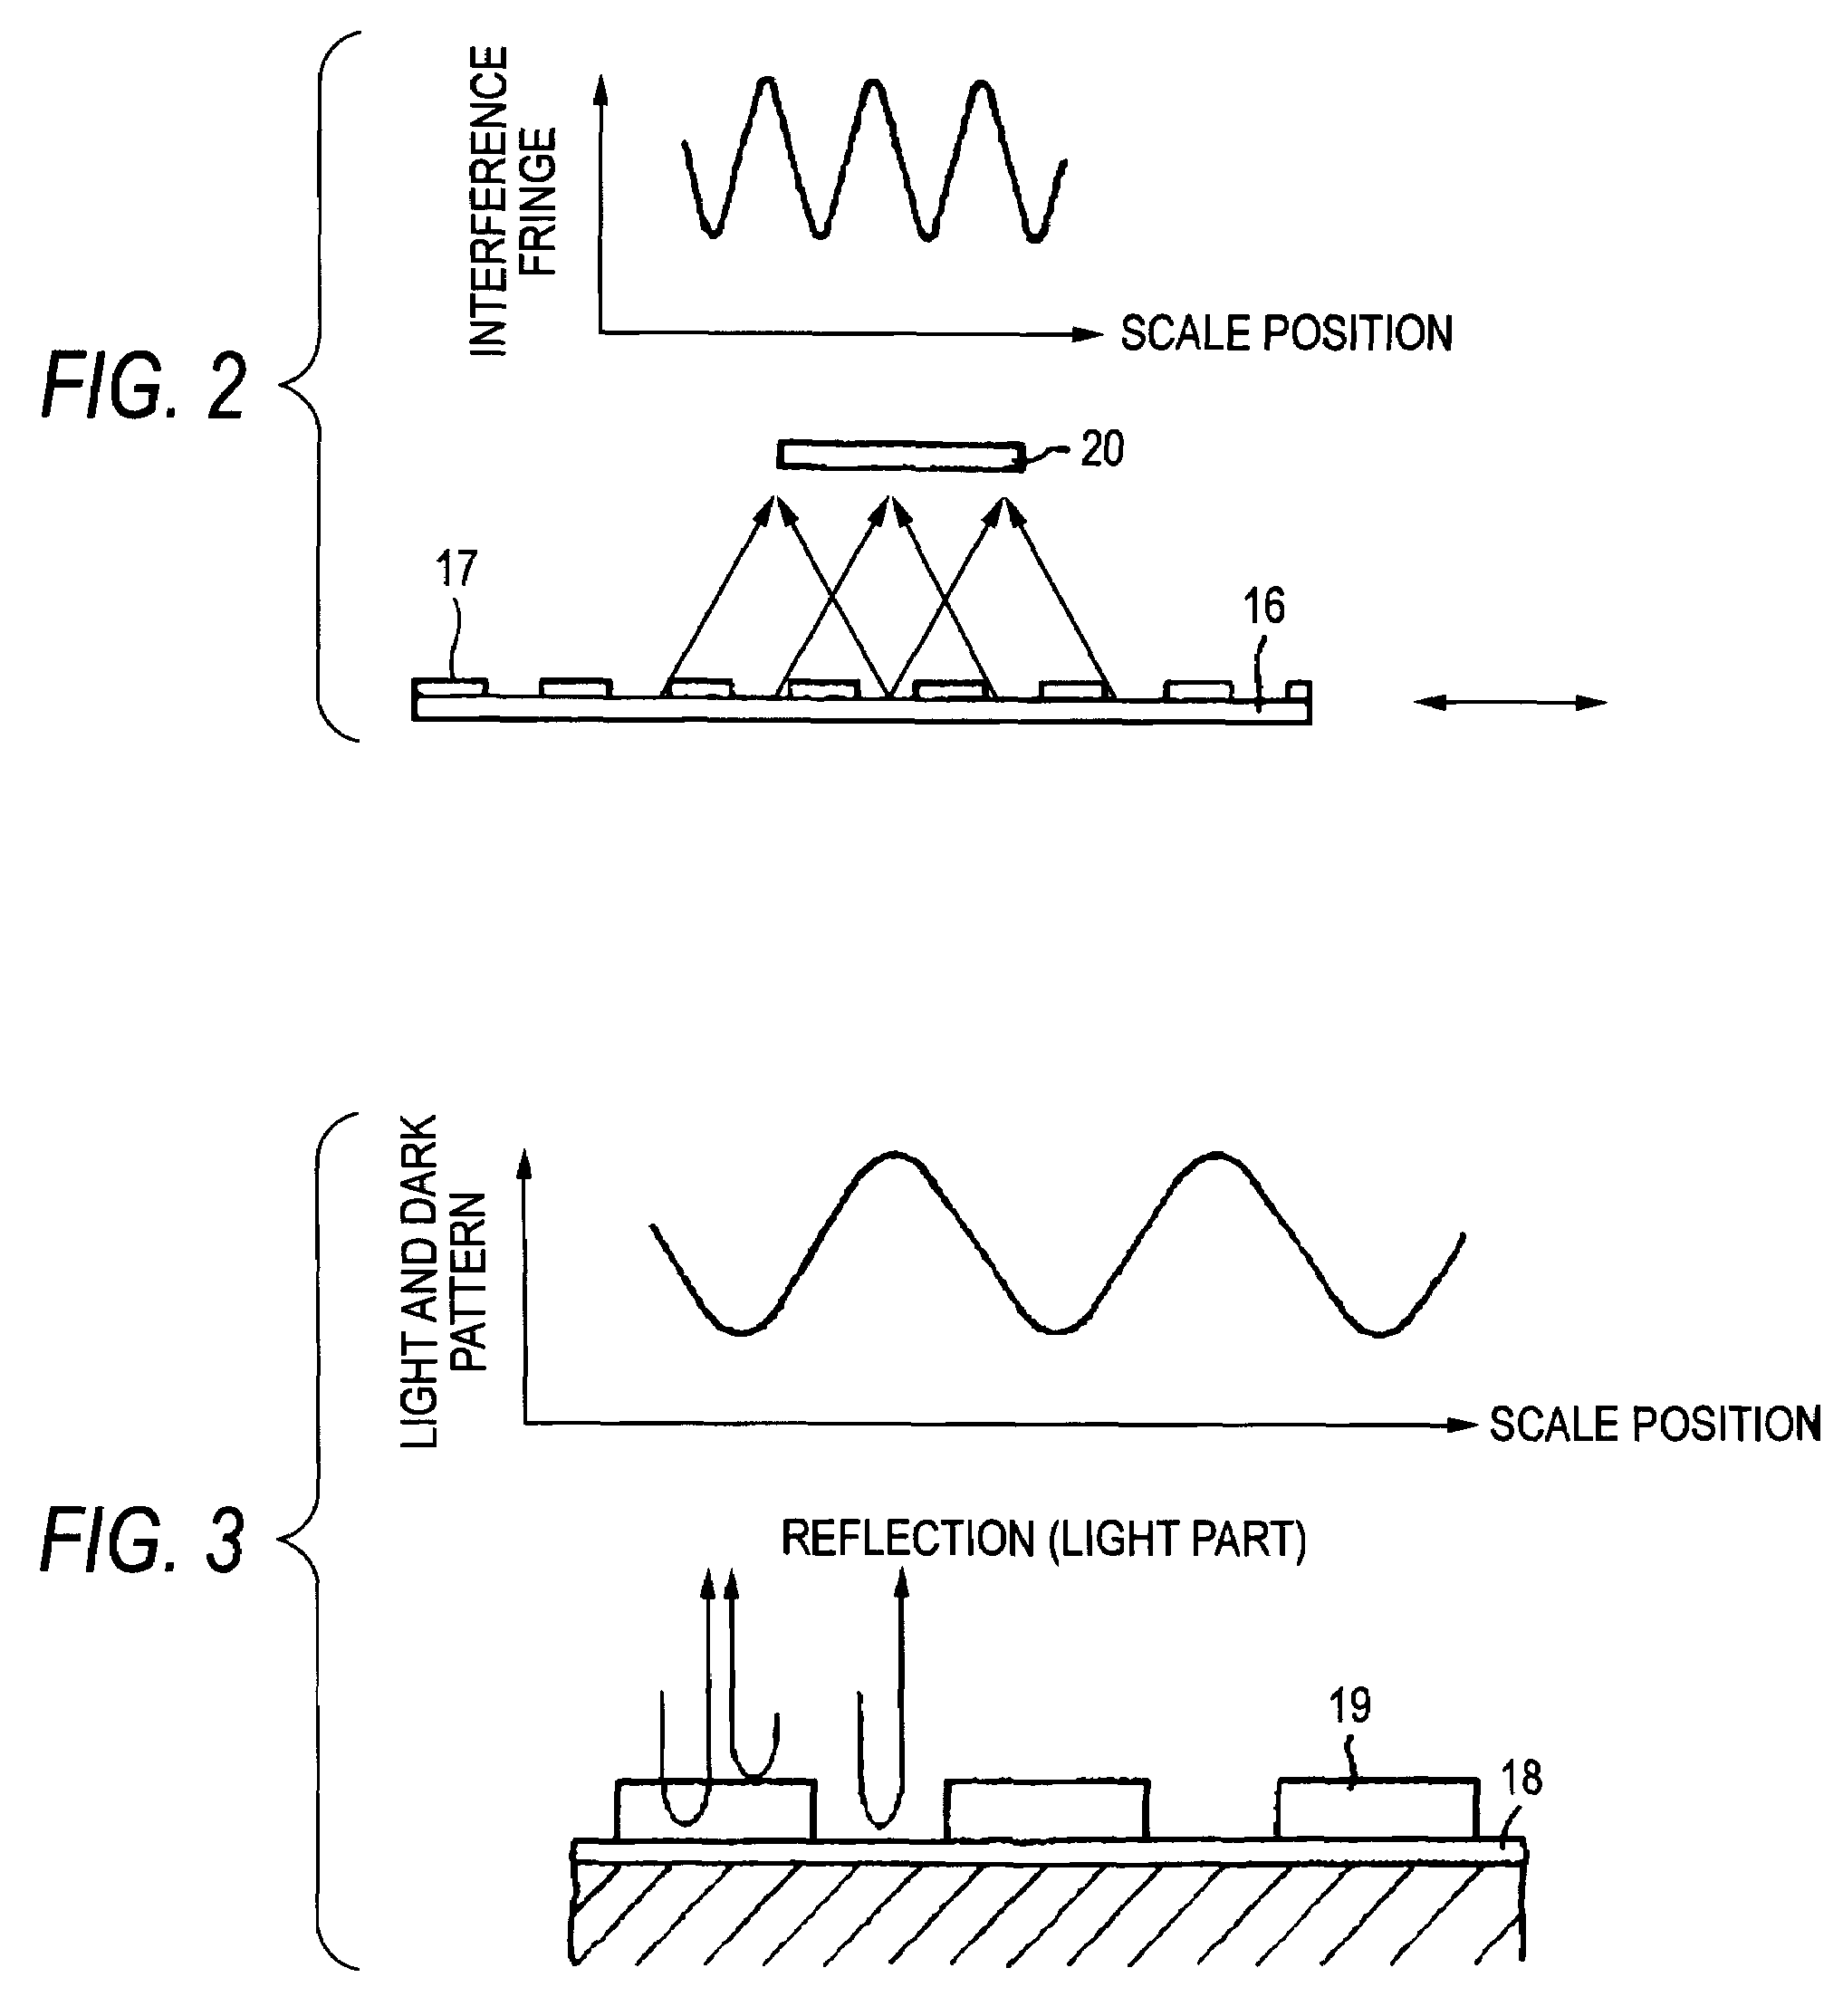 Photoelectric encoder with a transparent protective material having a thickness equal to or greater than a depth of focus of an image forming optical system disposed on the surface of a scale